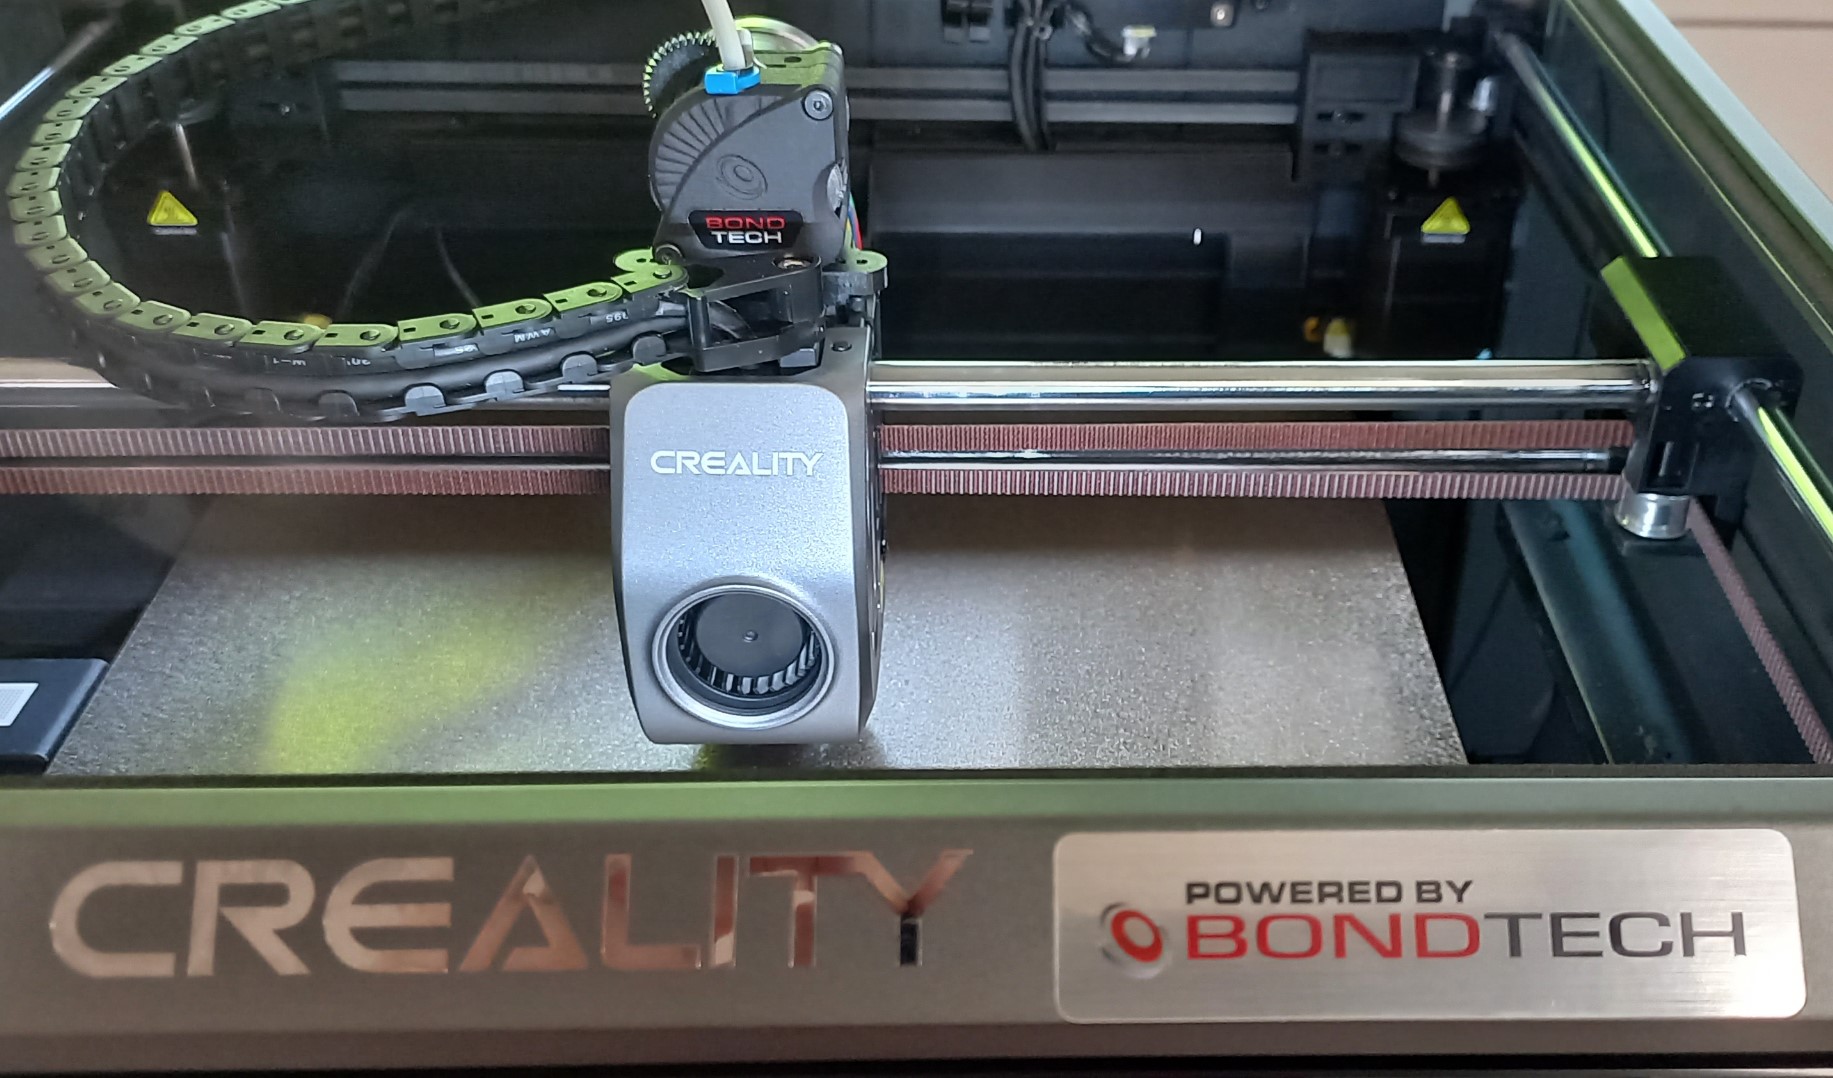 A Creality K1 that is powered by a Bondtech LGX Lite extruder.